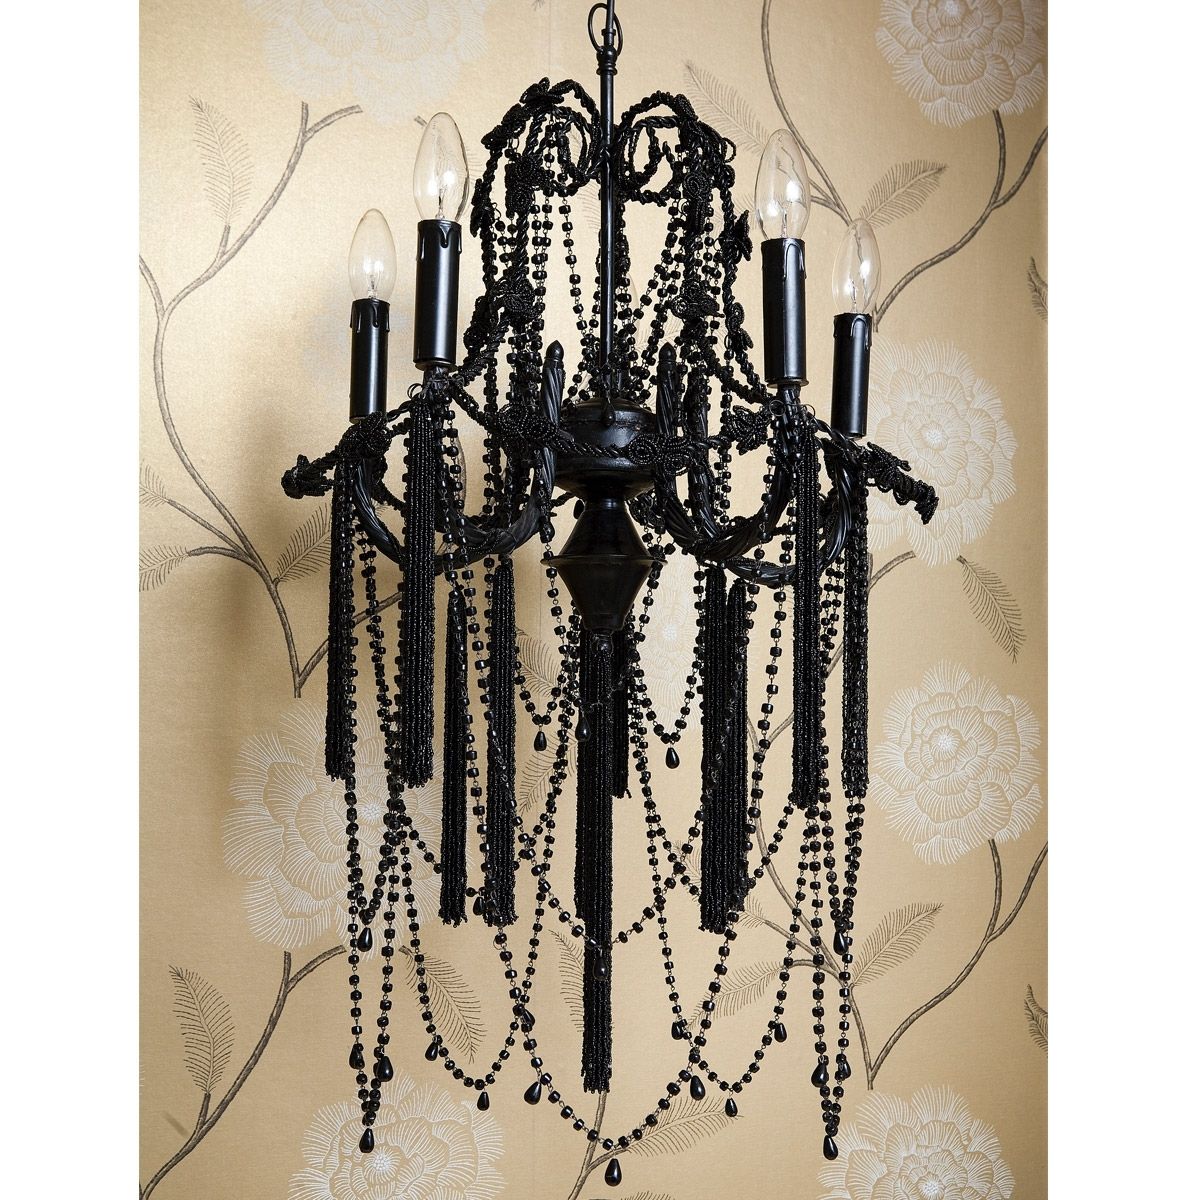 Wall Mounted Chandeliers Within Popular Wall Mounted Black Chandeliers Bedroom – Howiezine (View 16 of 20)